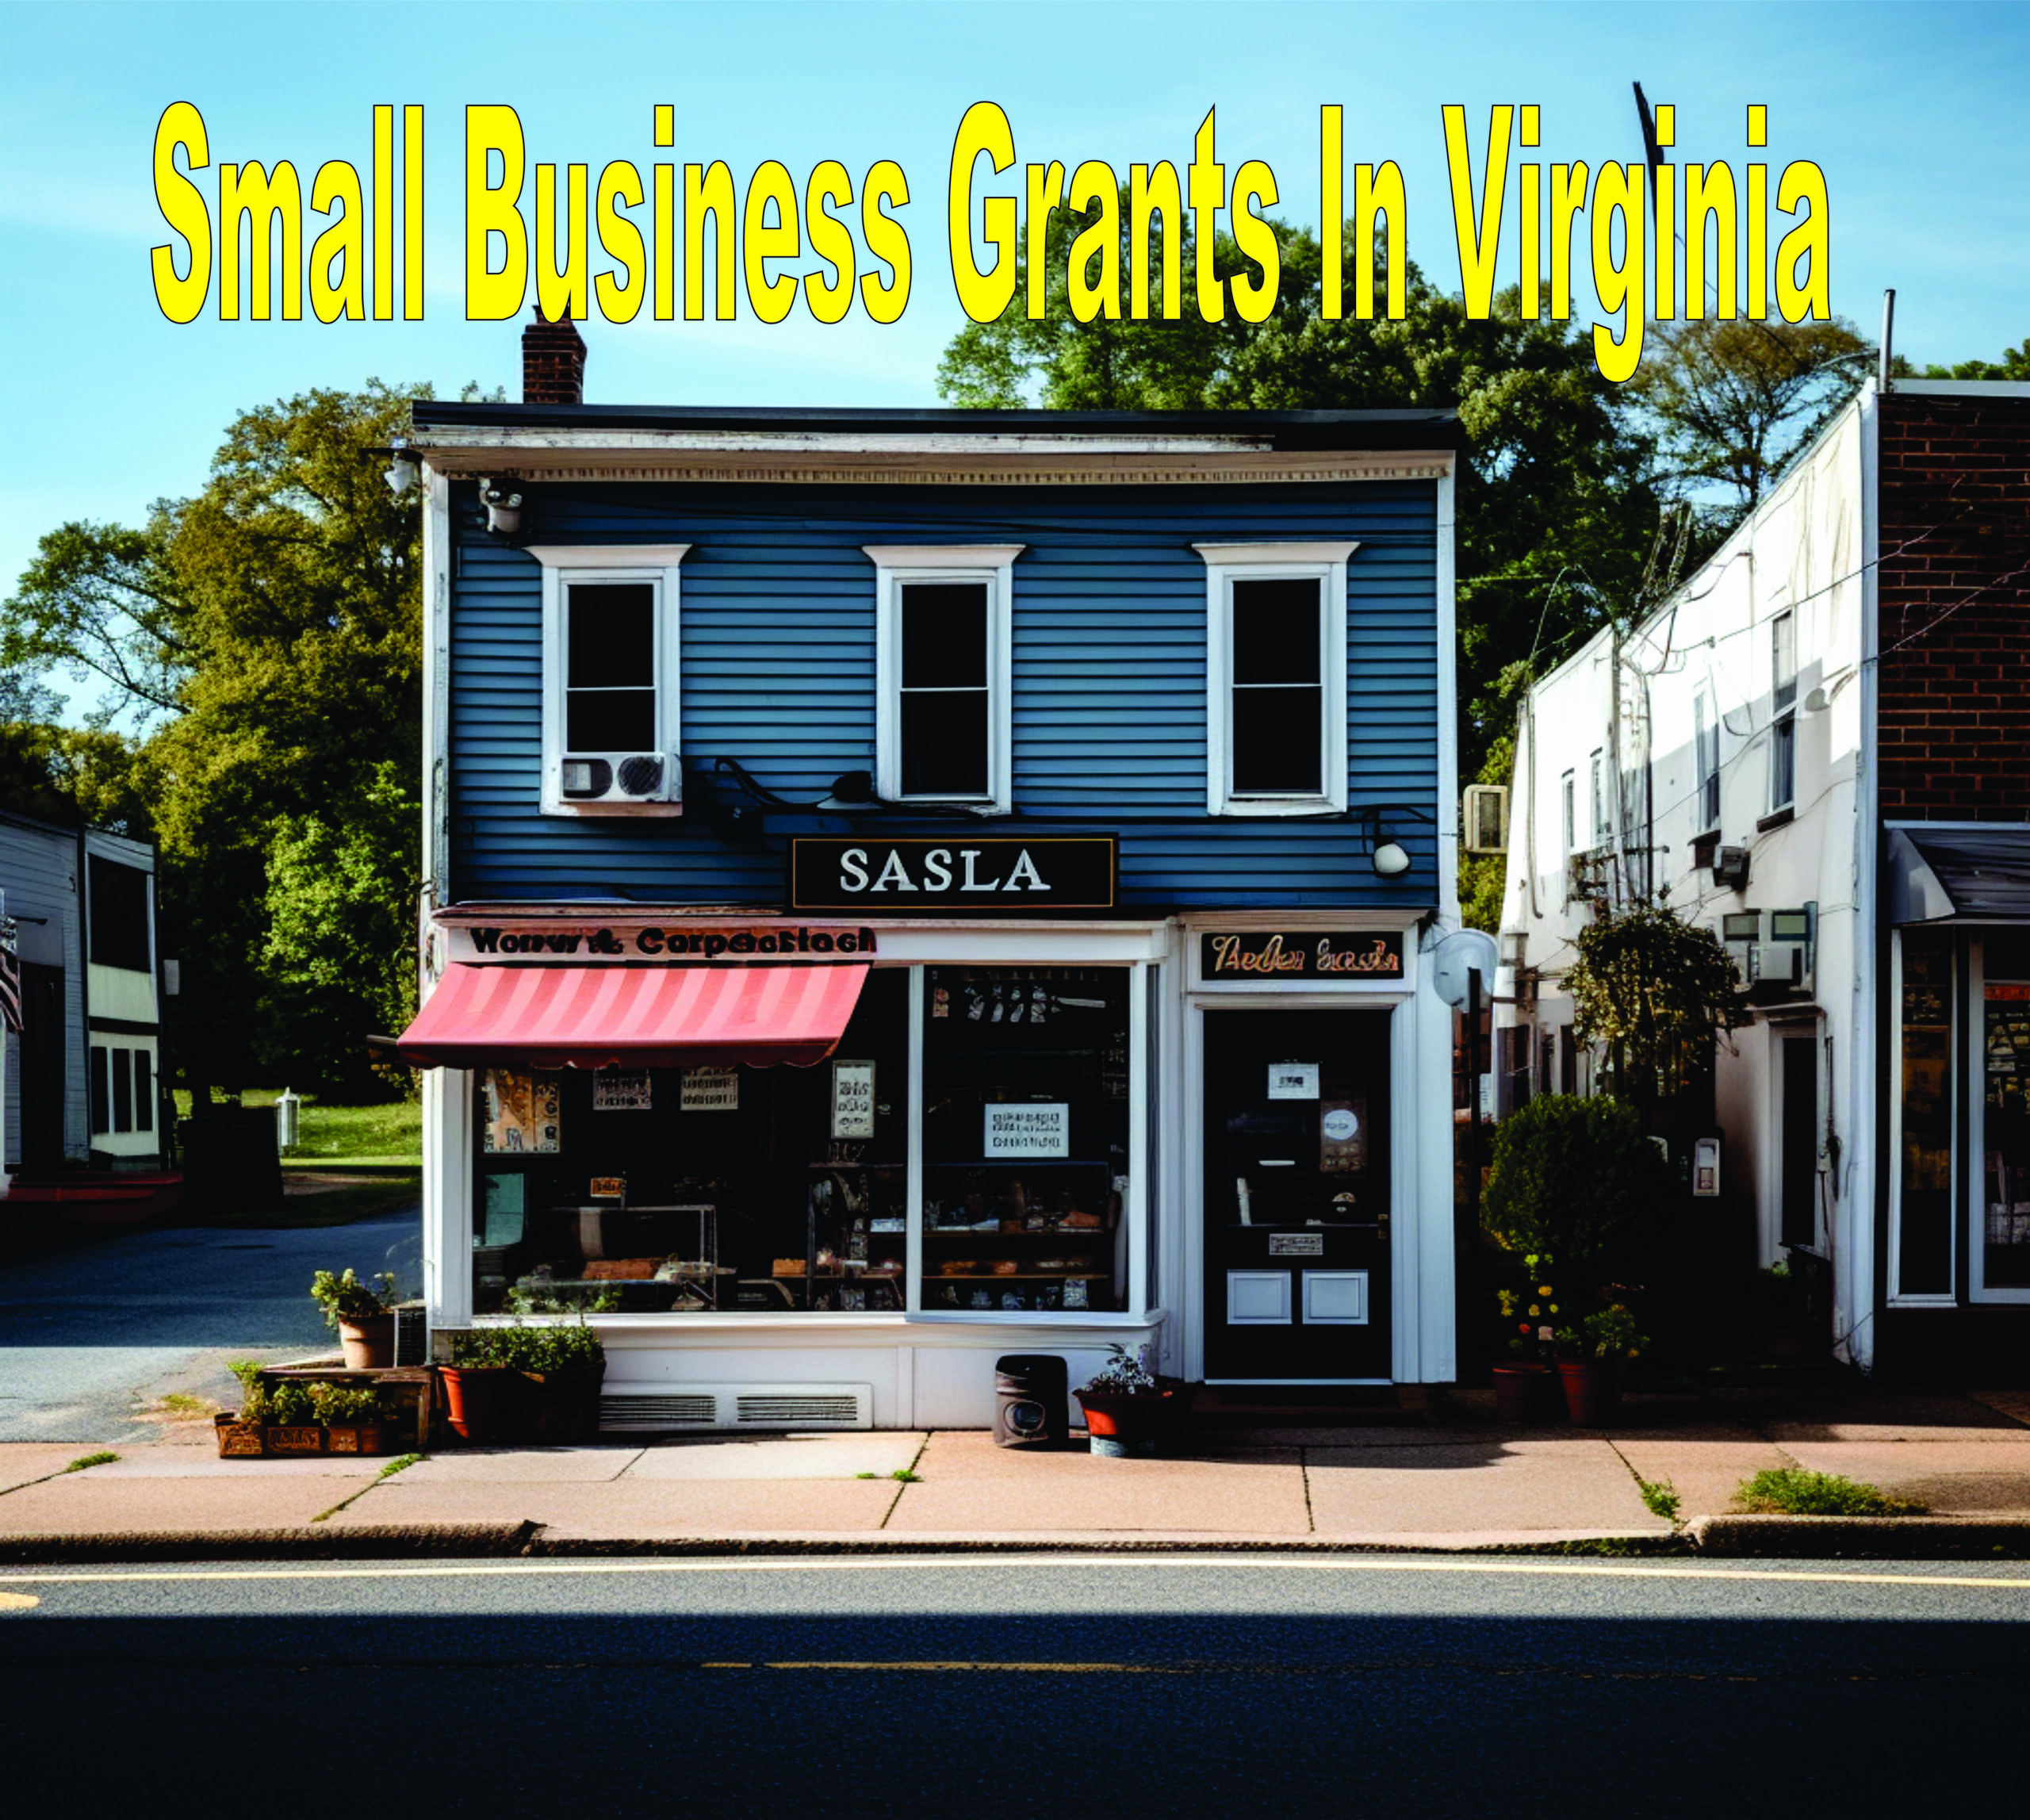 Small Business Grants In Virginia